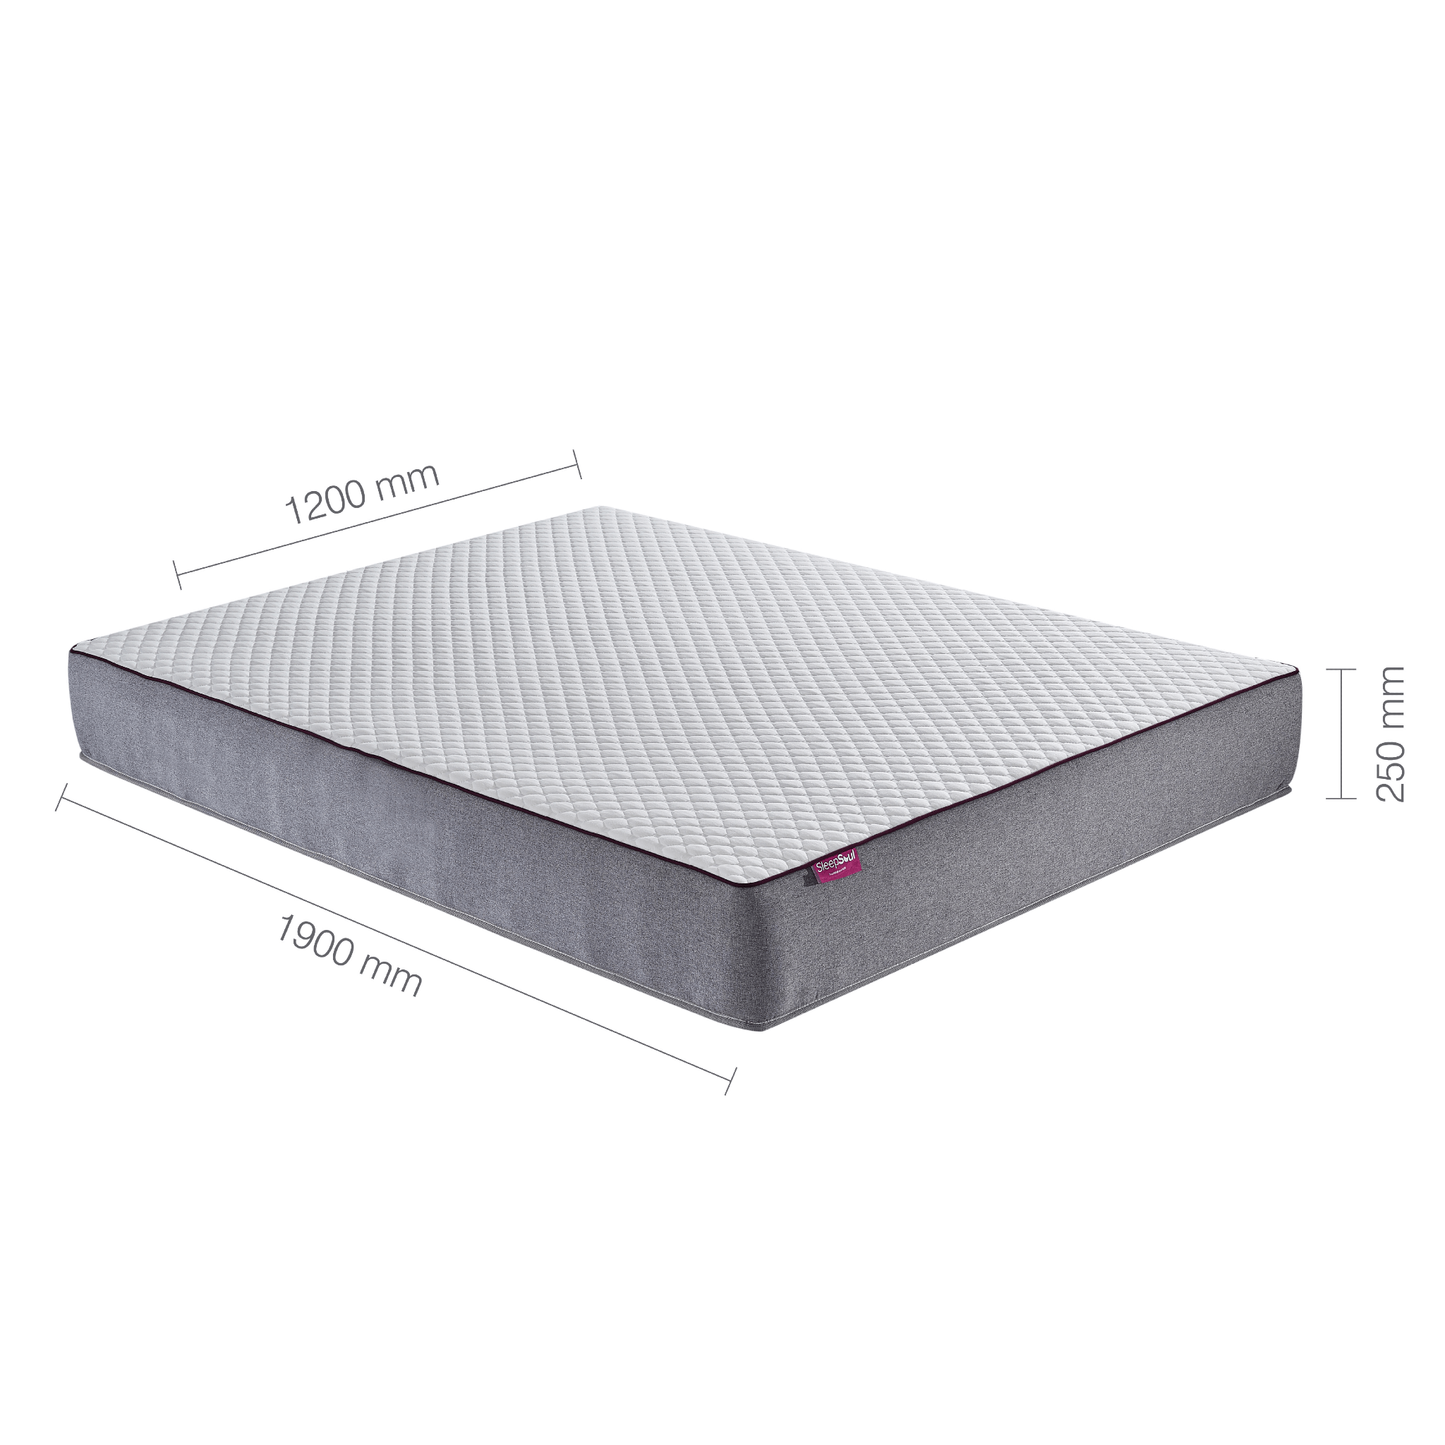 SleepSoul paradise 600 pocket spring and coolgel mattressfoam standard small double mattress dimensions